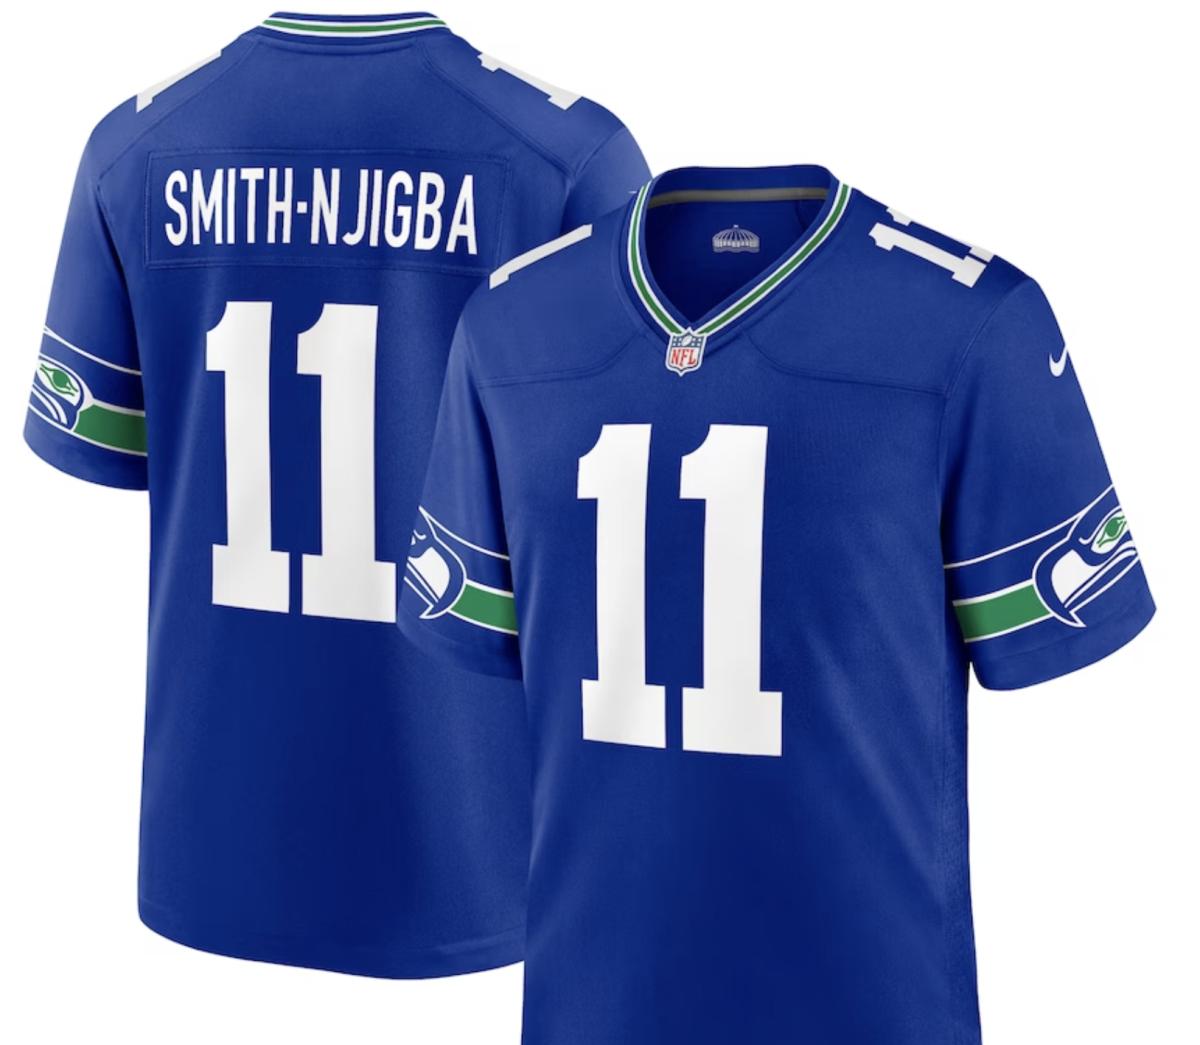 Seahawks Throwback Uniforms Coming 2023 